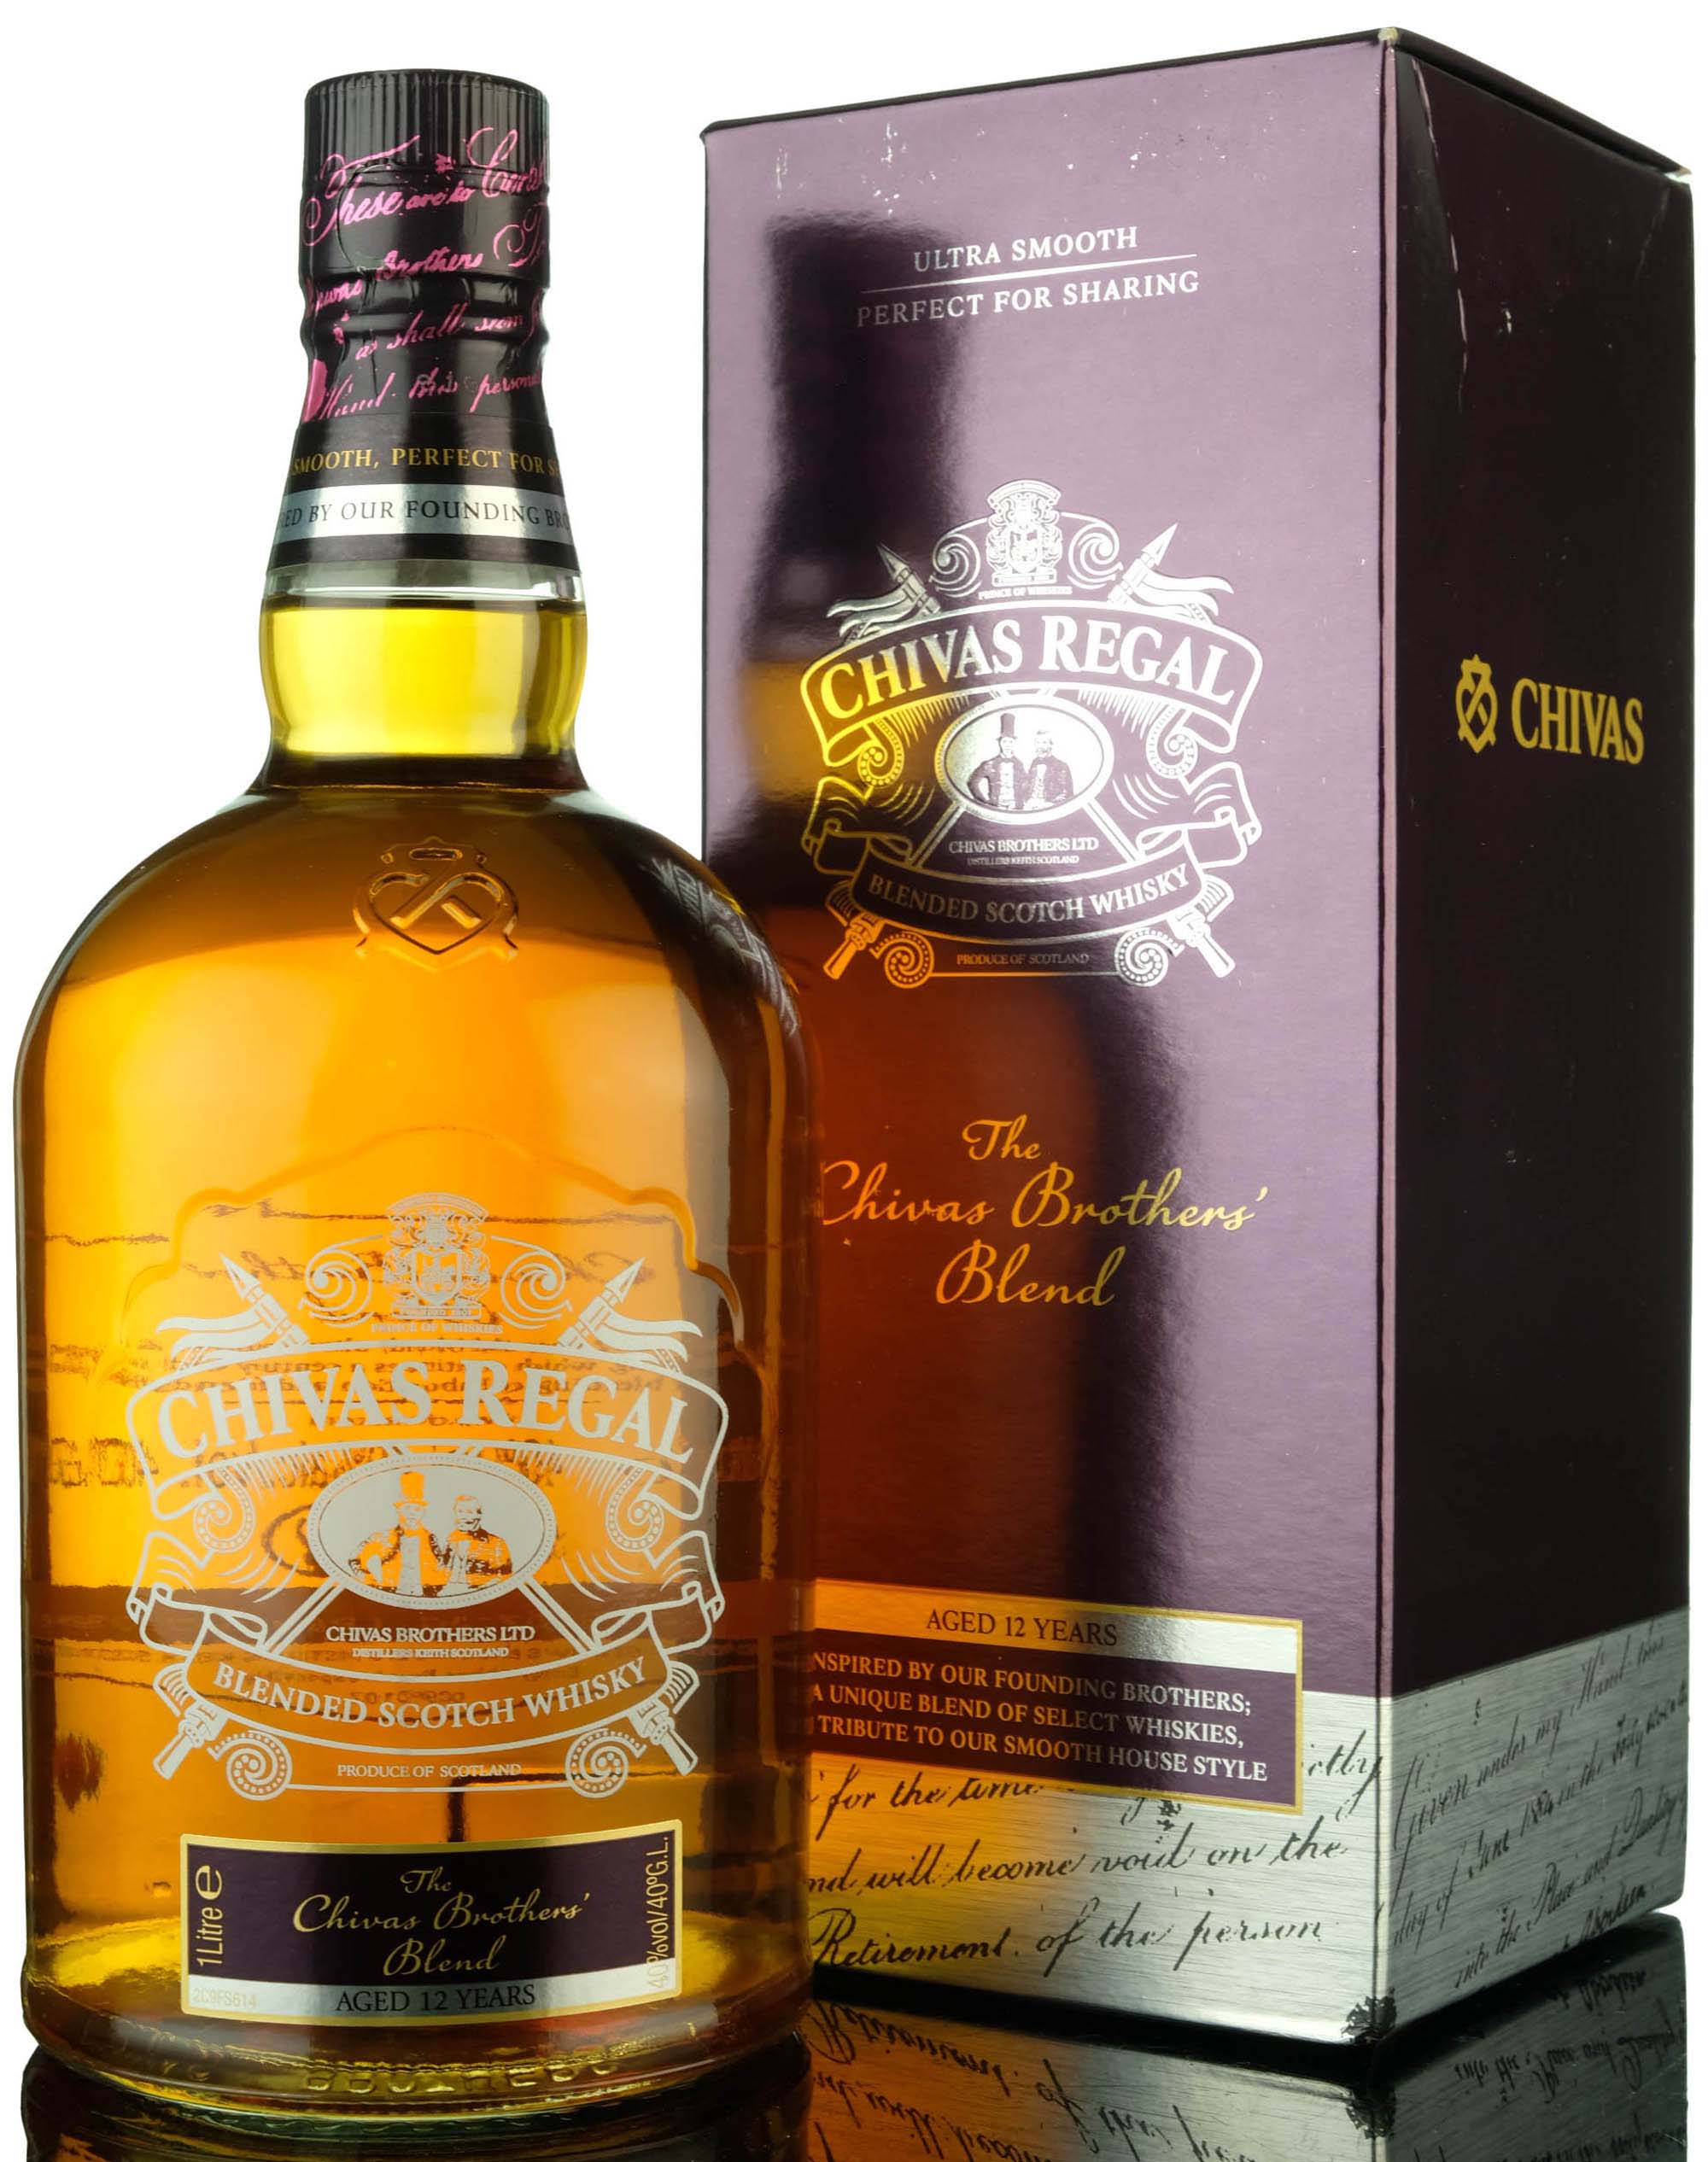 Chivas Regal 12 Year Old - The Chivas Brothers Blend - 2018 Release - 1 Litre